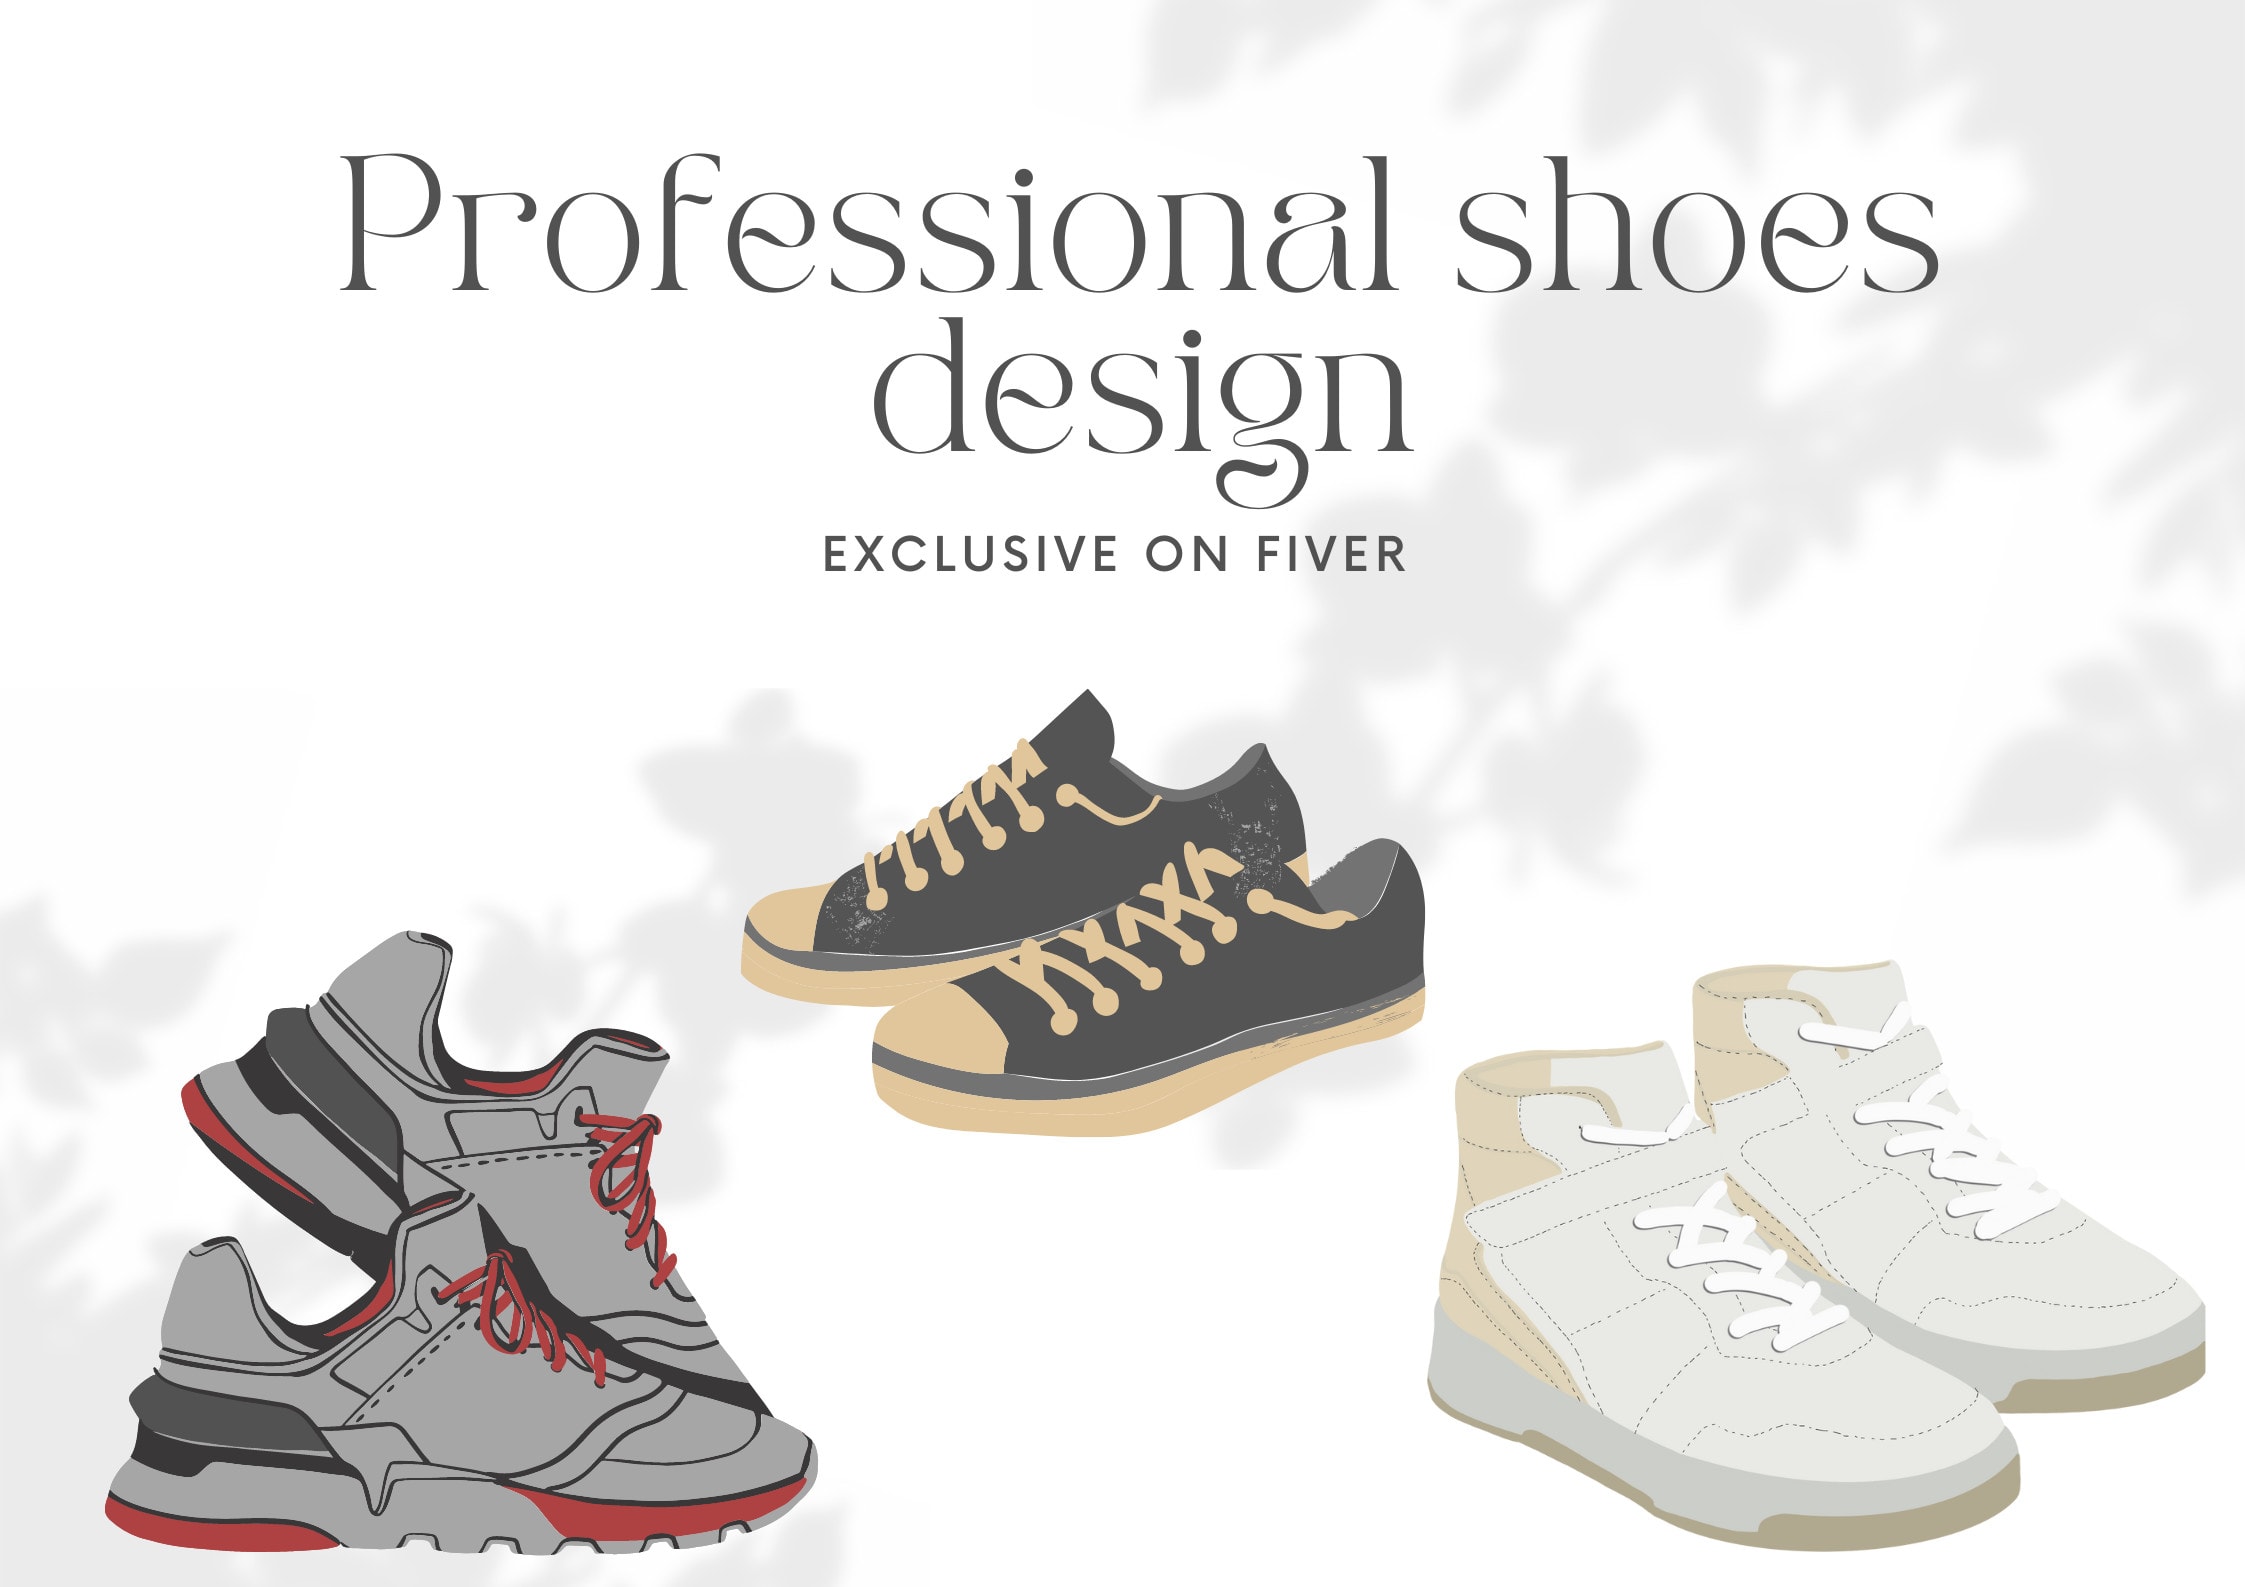 Running Shoe Design Sketches - footwear & softgoods - Core77 Discussion  Boards